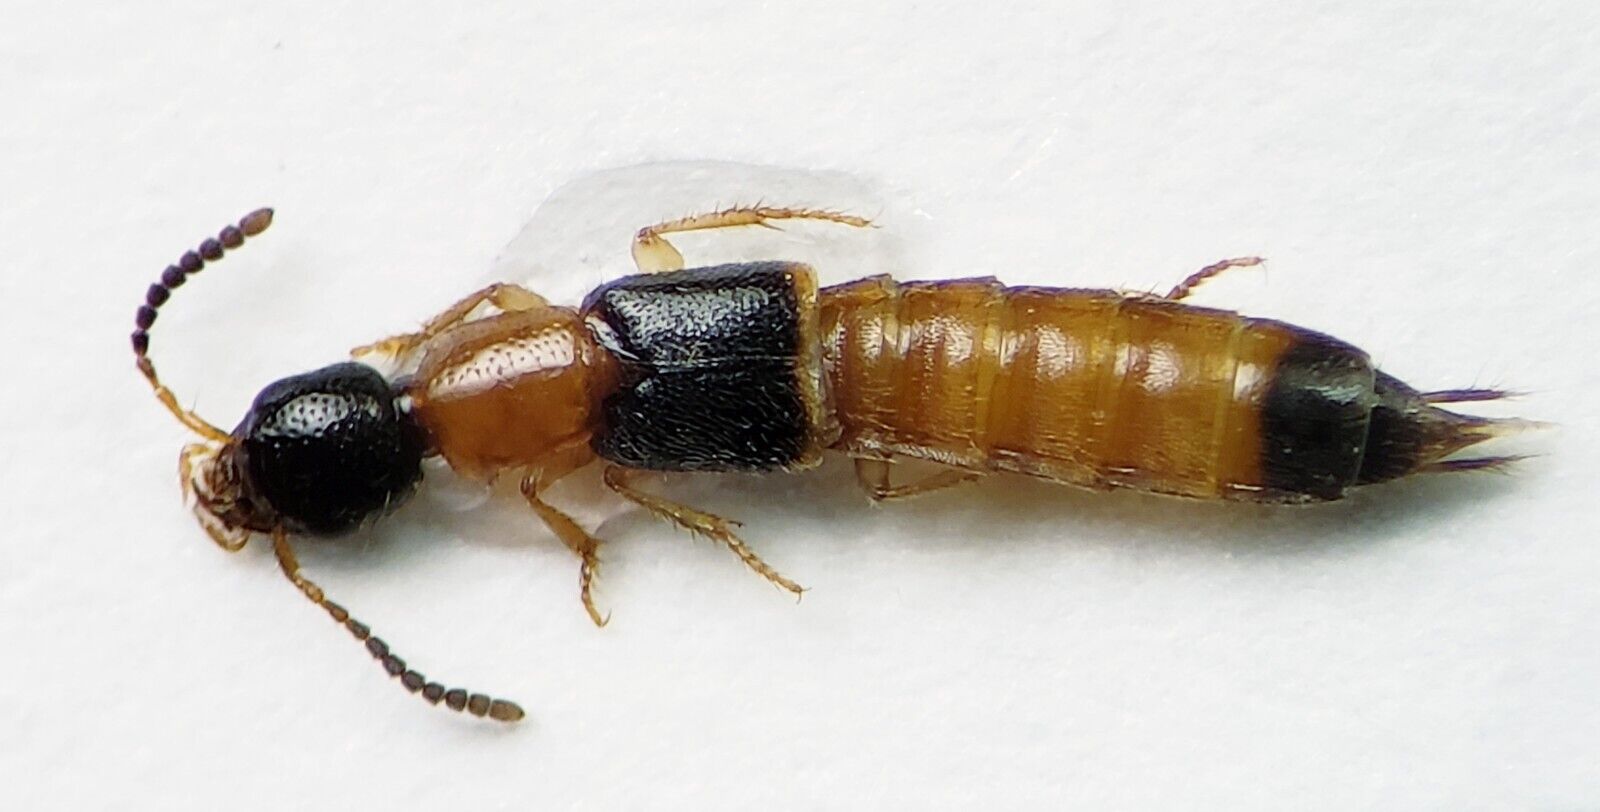 Rove Beetle: Neobisnius sp. (Staphylinidae) USA Coleoptera Insect